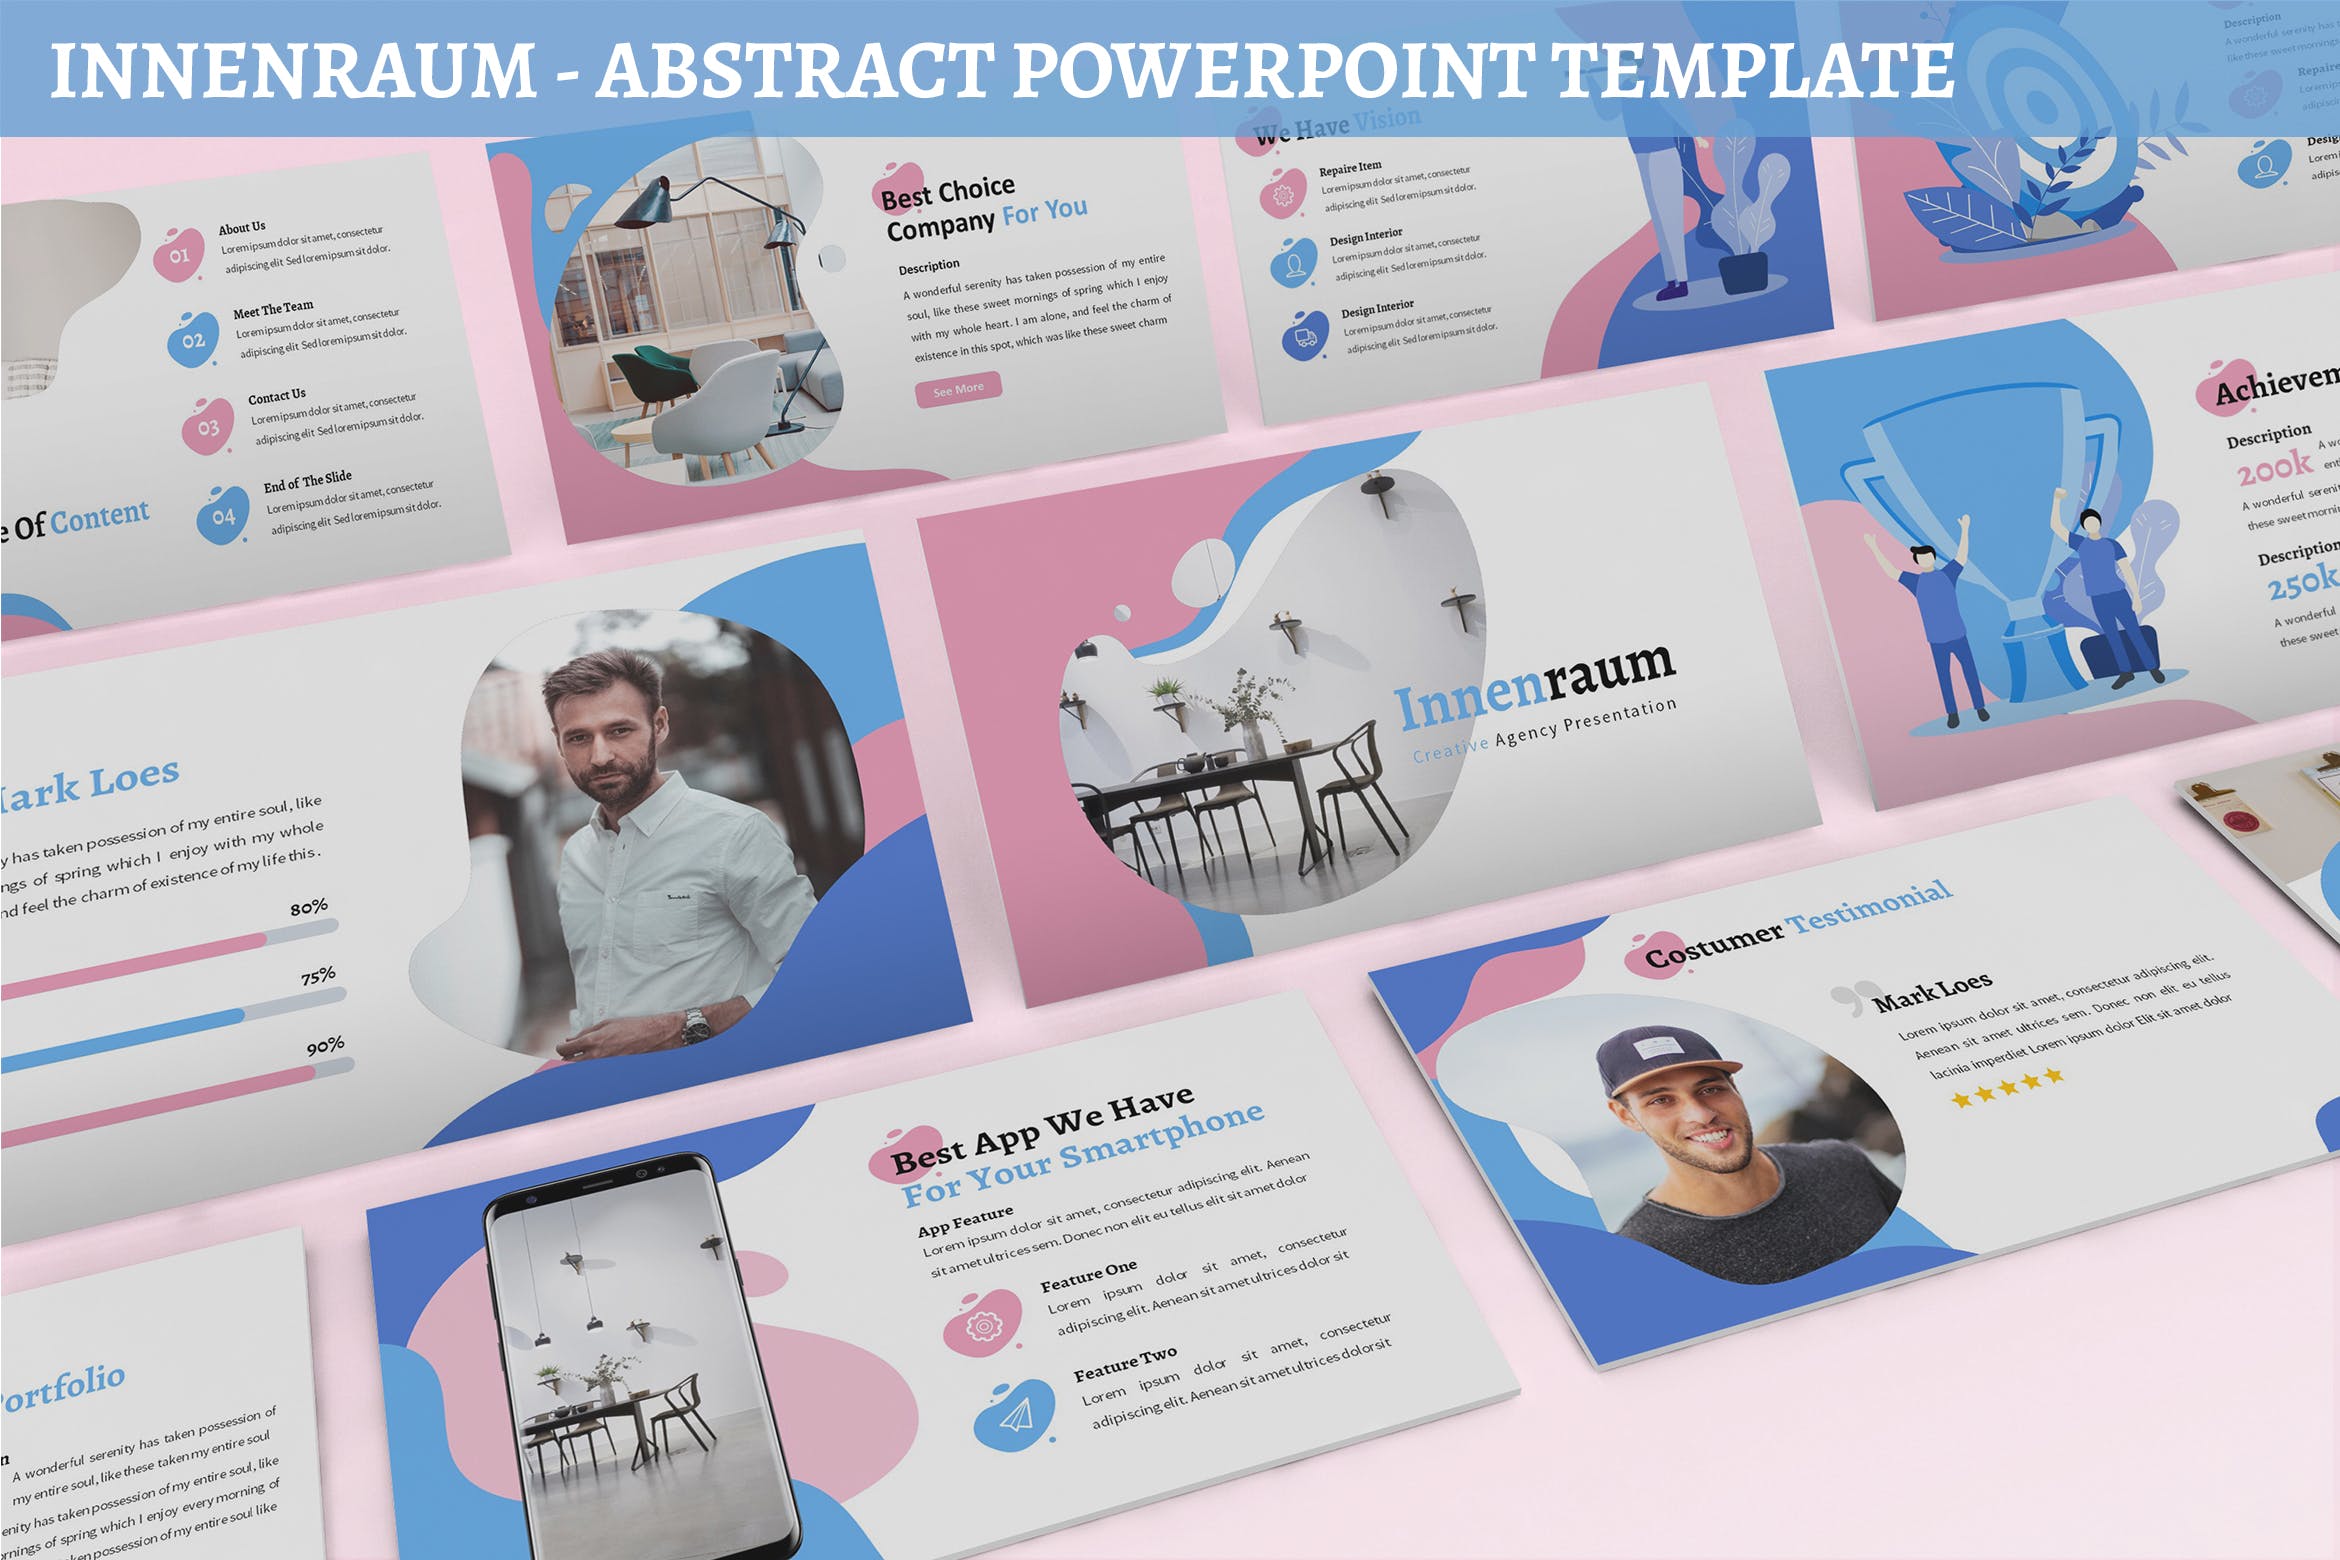 Cover image of Innenraum - Abstract Powerpoint Template.